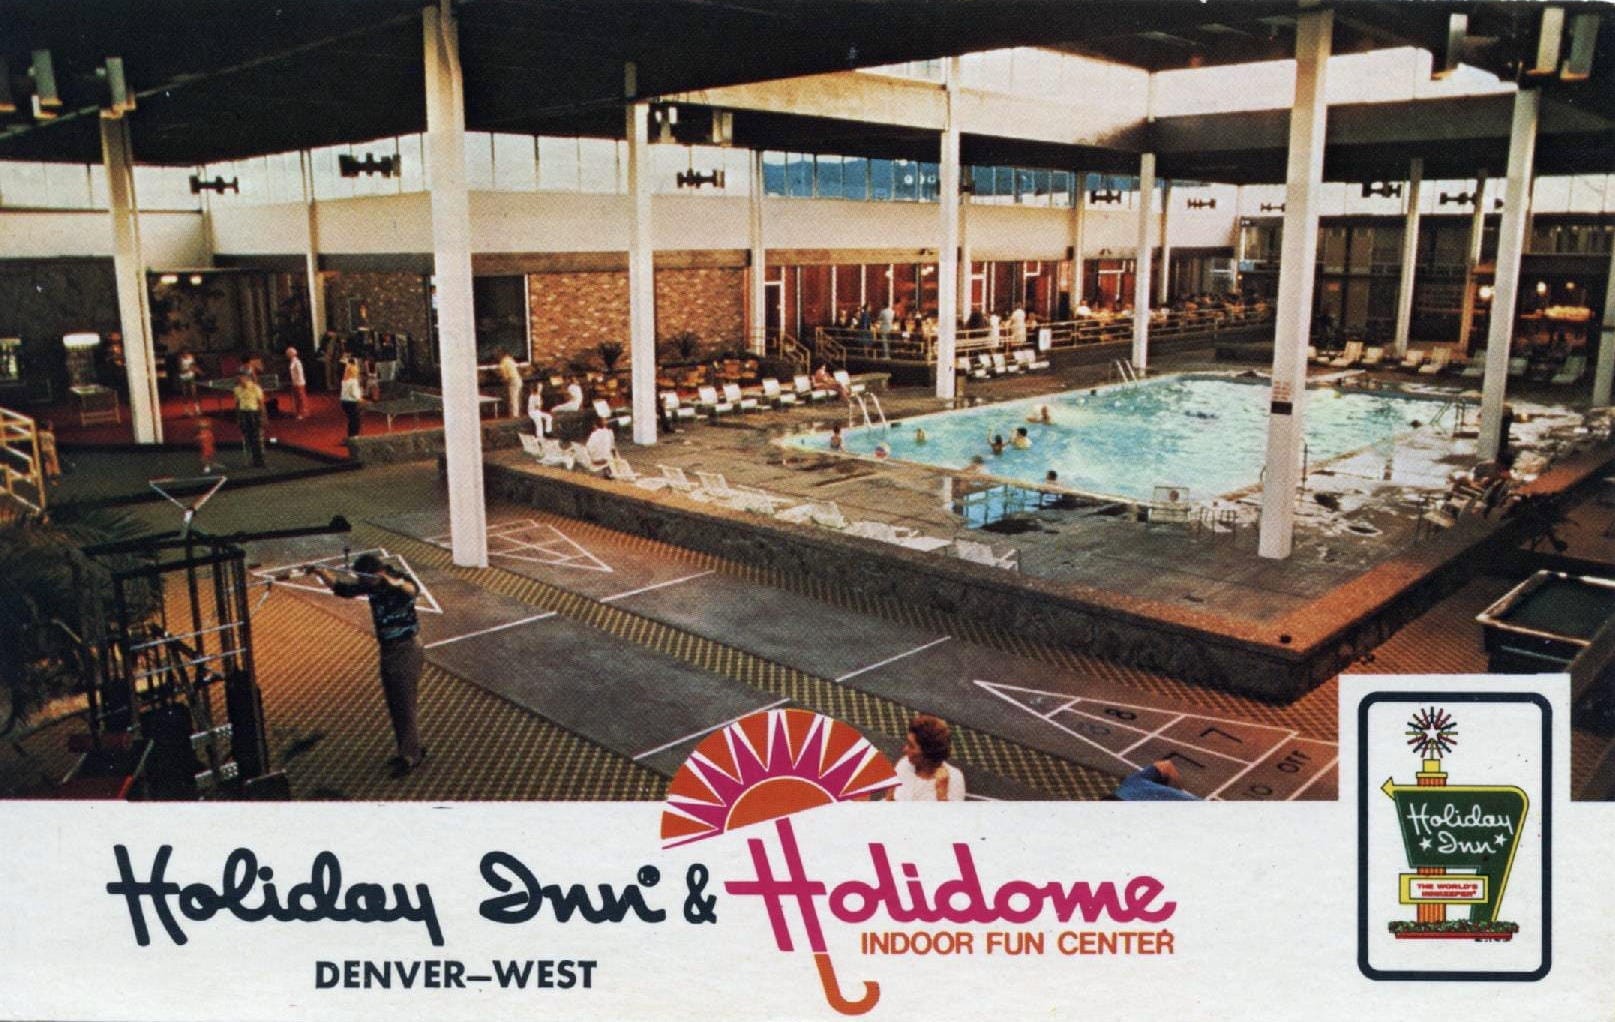 Postcard image of the Denver West Holiday Inn with an Indoor Pool